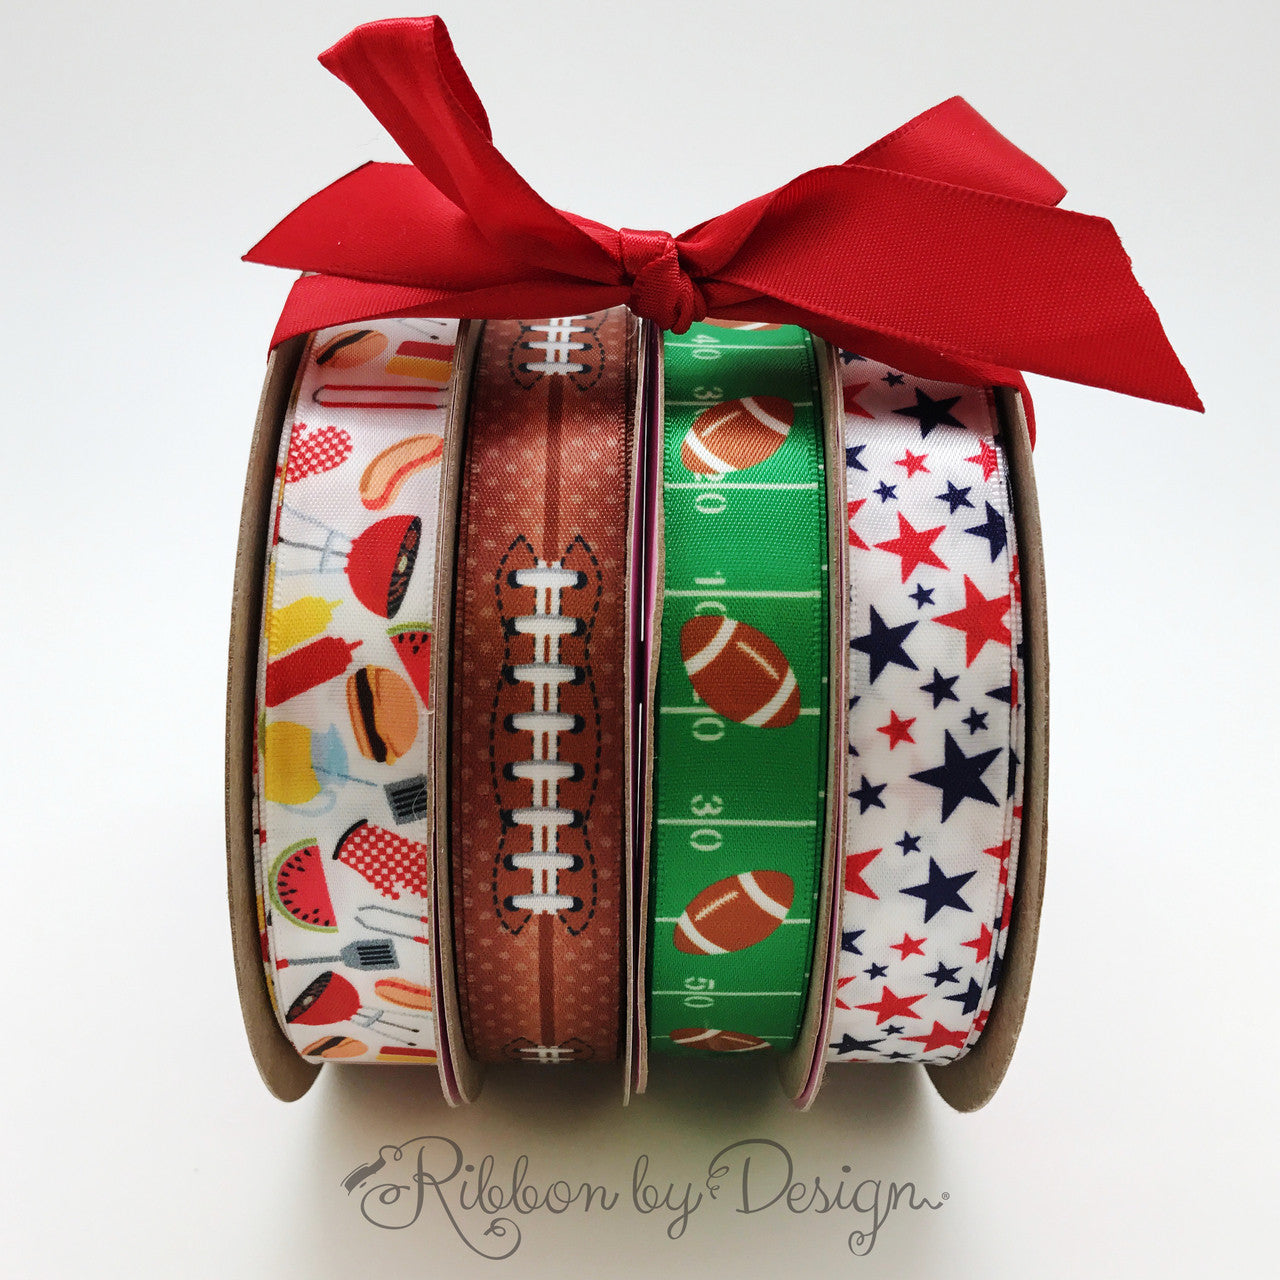 Mix and match our football ribbons with a barbecue or patriotic themed ribbons to make for the perfect tailgate!